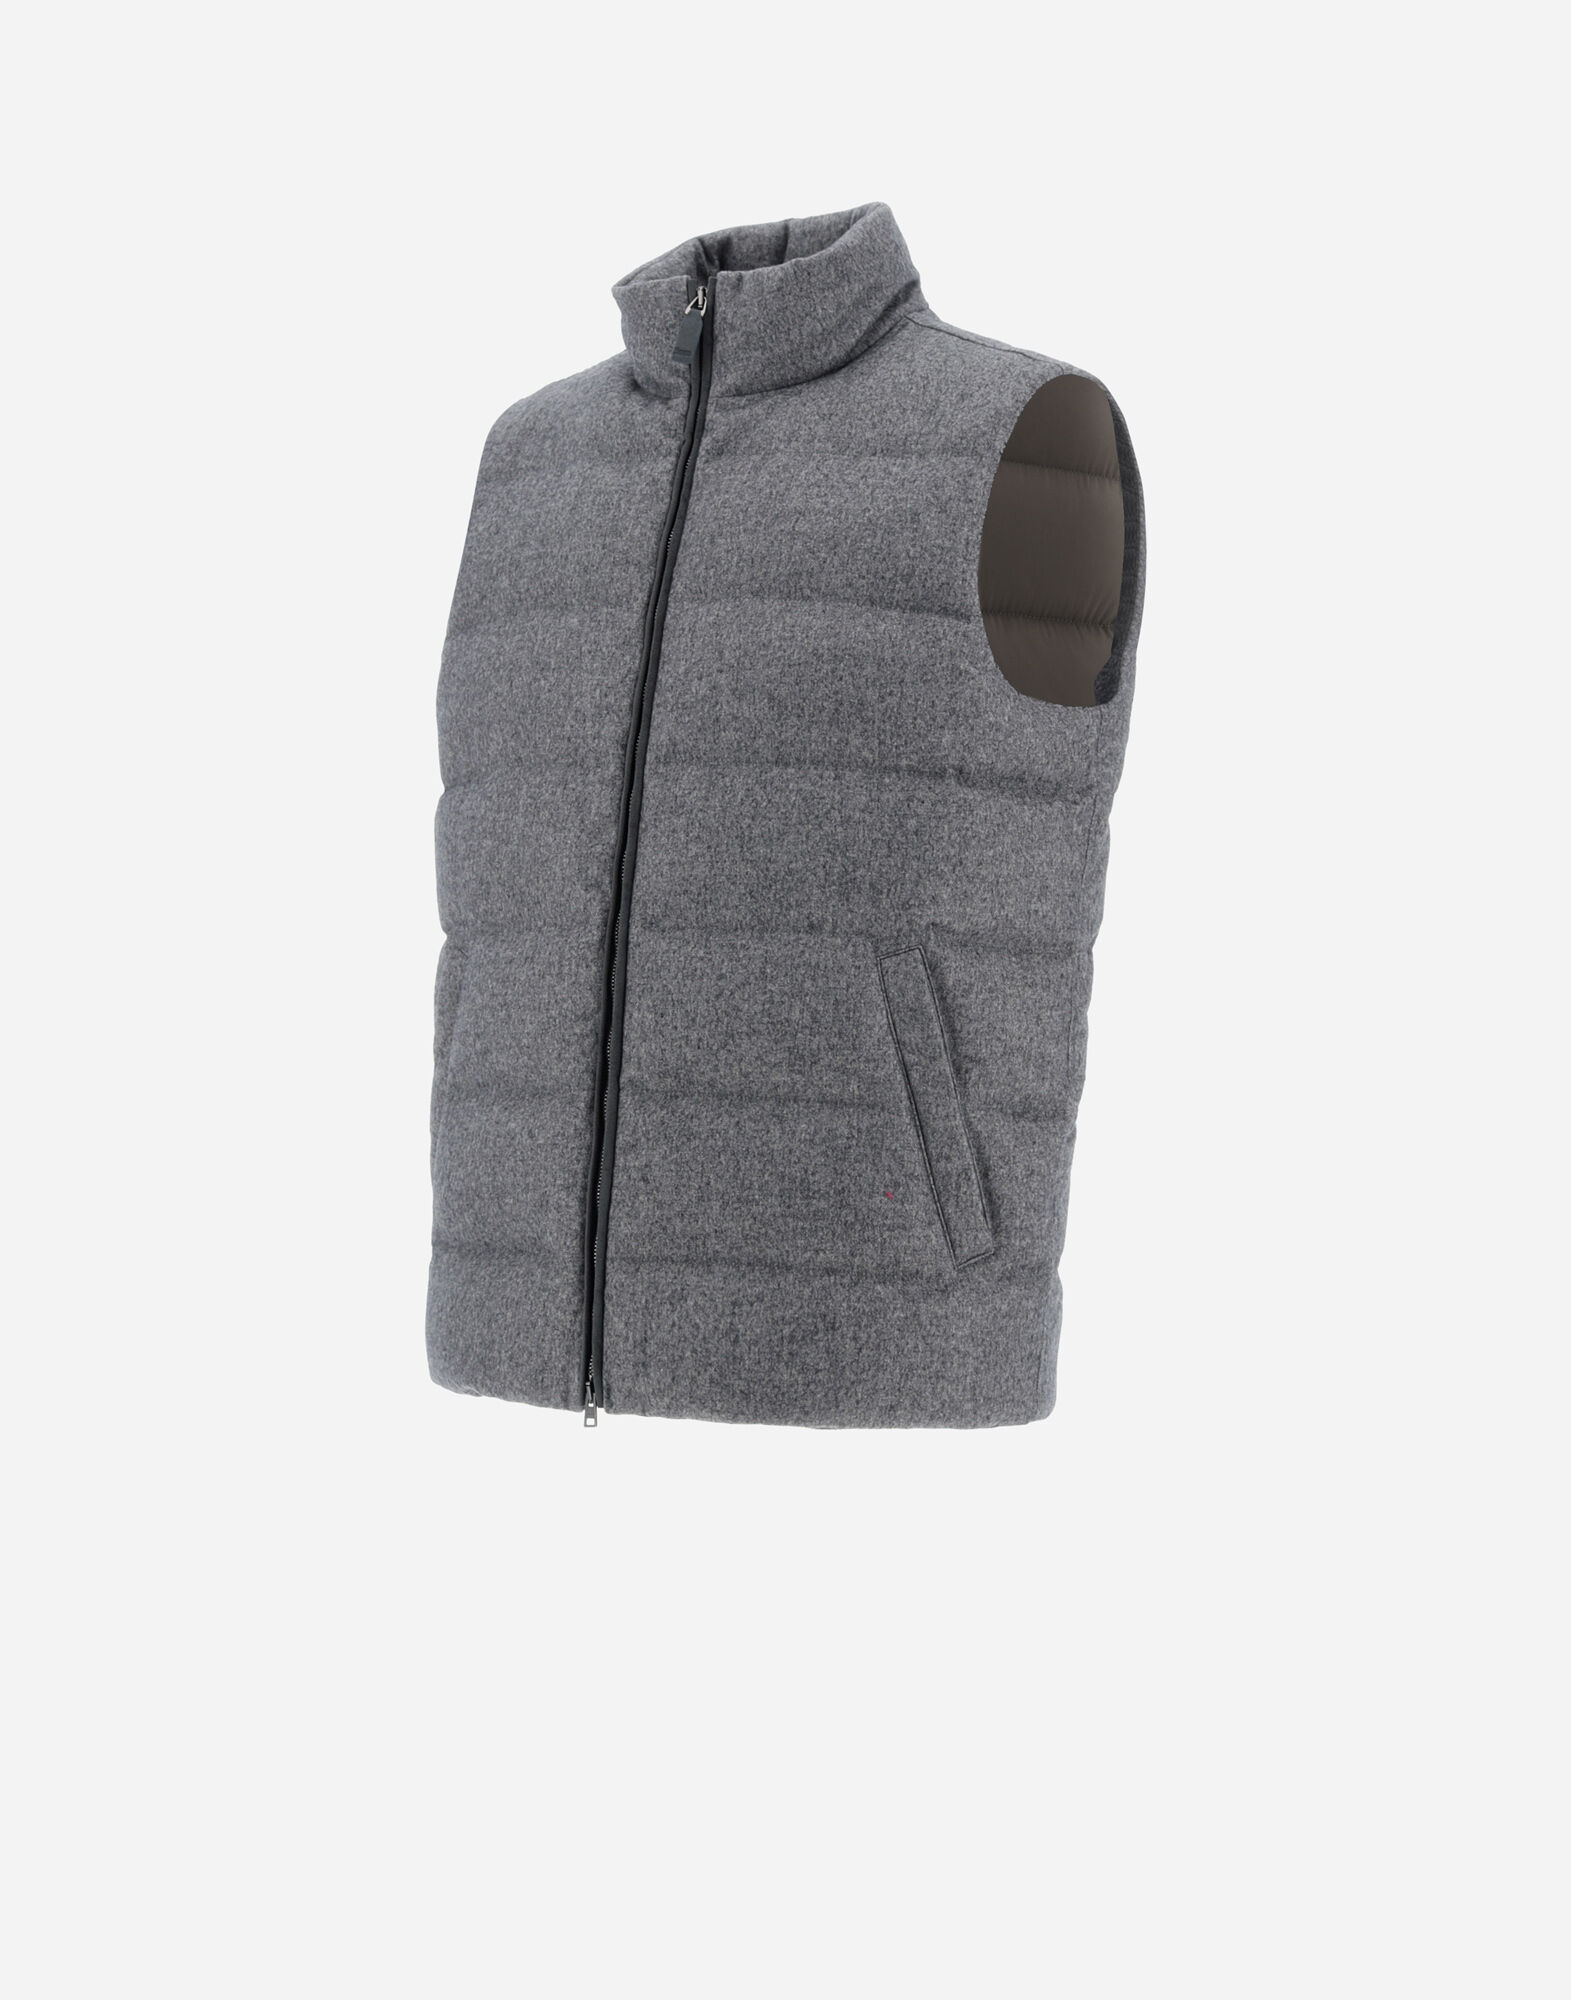 CASHMERE AND SILK SLEEVELESS JACKET in Light Grey/Dark Grey for 